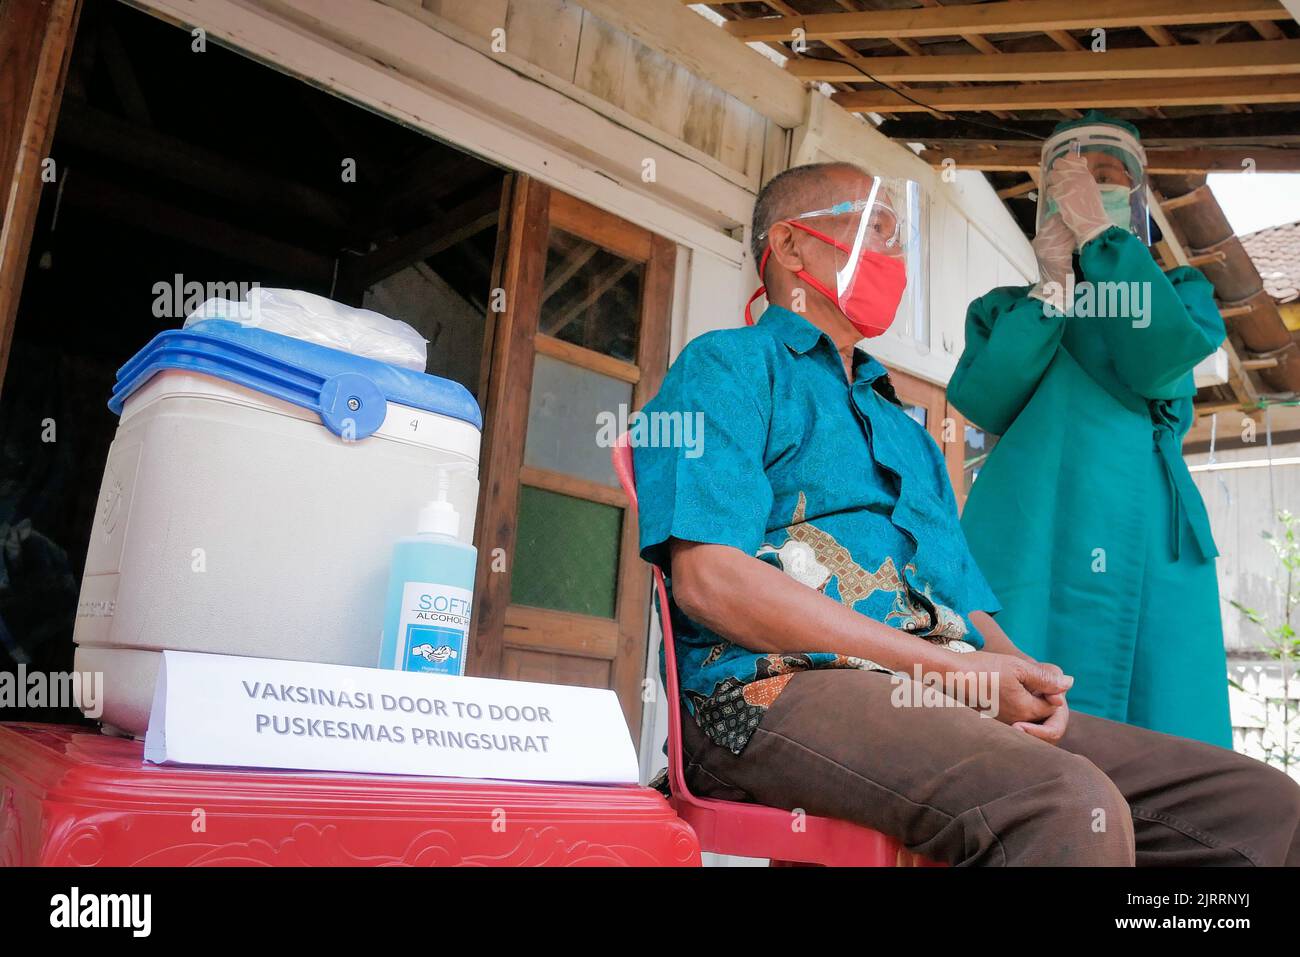 Temanggung, Central Java, Indonesia, Sept 23, 2021: Medical workers prepare injections of the Covid-19 vaccine. Through this method, vaccination participation is expected to increase because it can reach families who do not have access and are afraid to leave the house to avoid transmitting the virus. Stock Photo